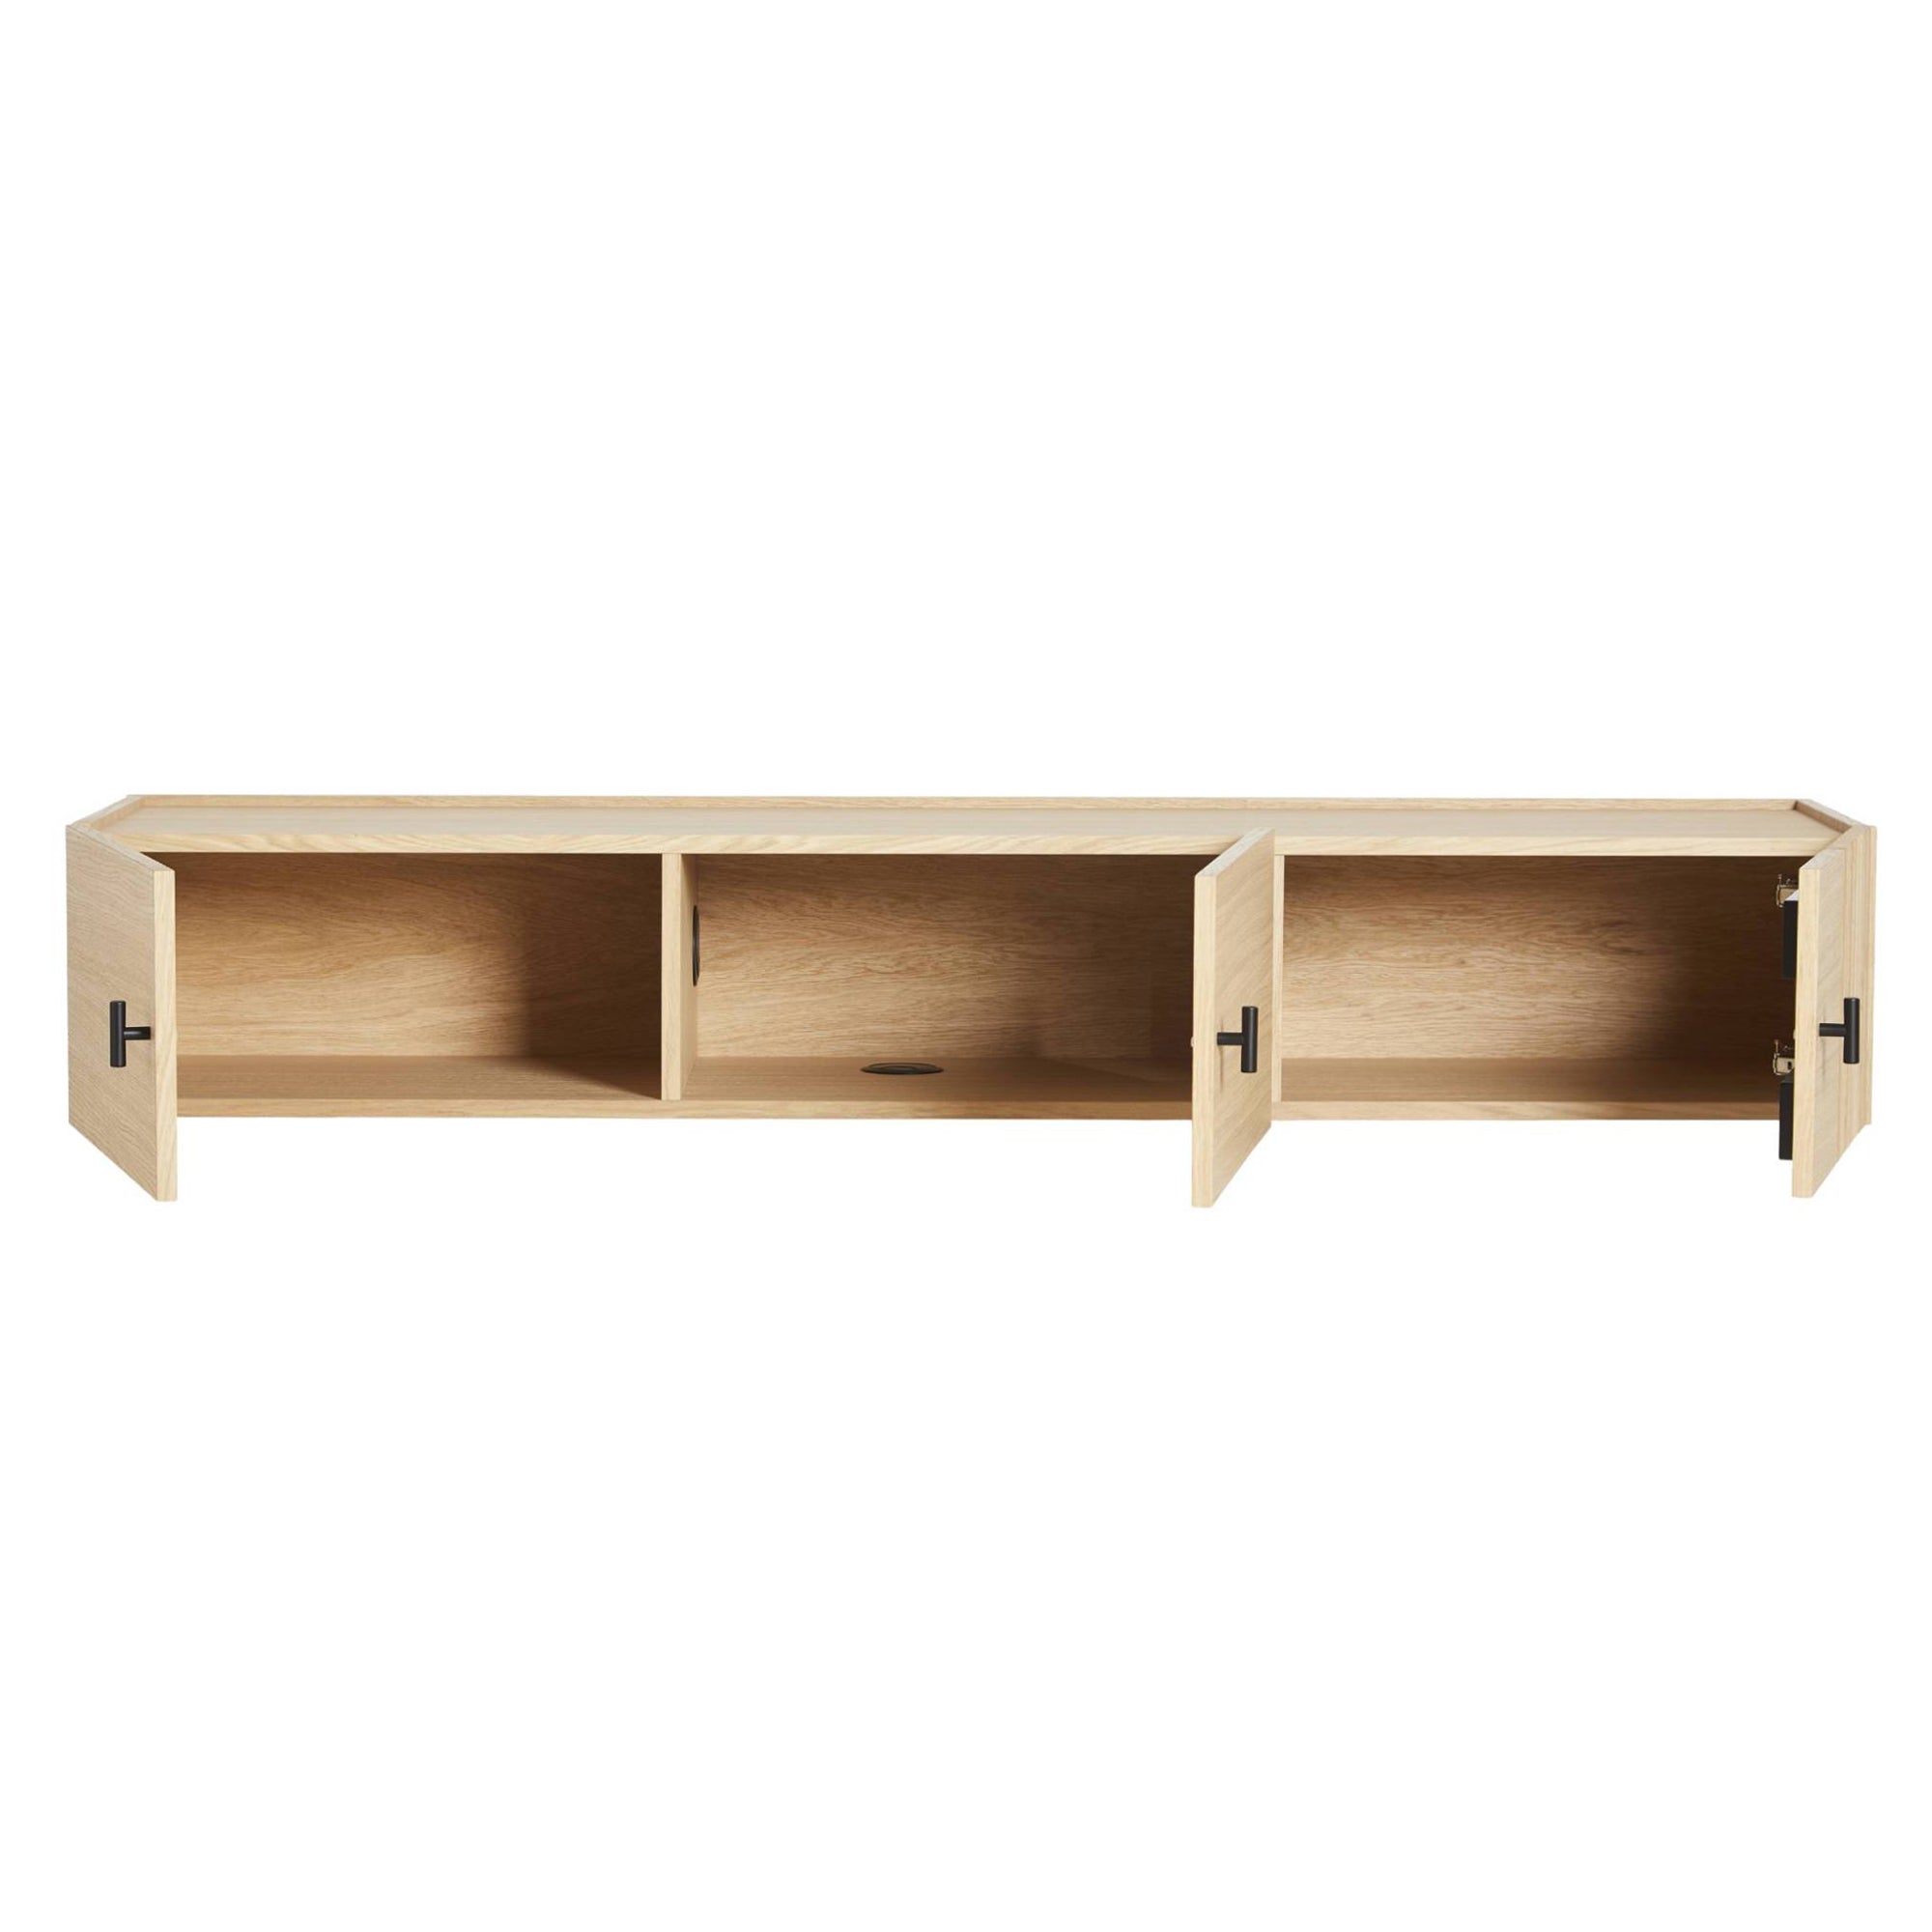 Array Wall Mounted Sideboard: White Pigmented Oak